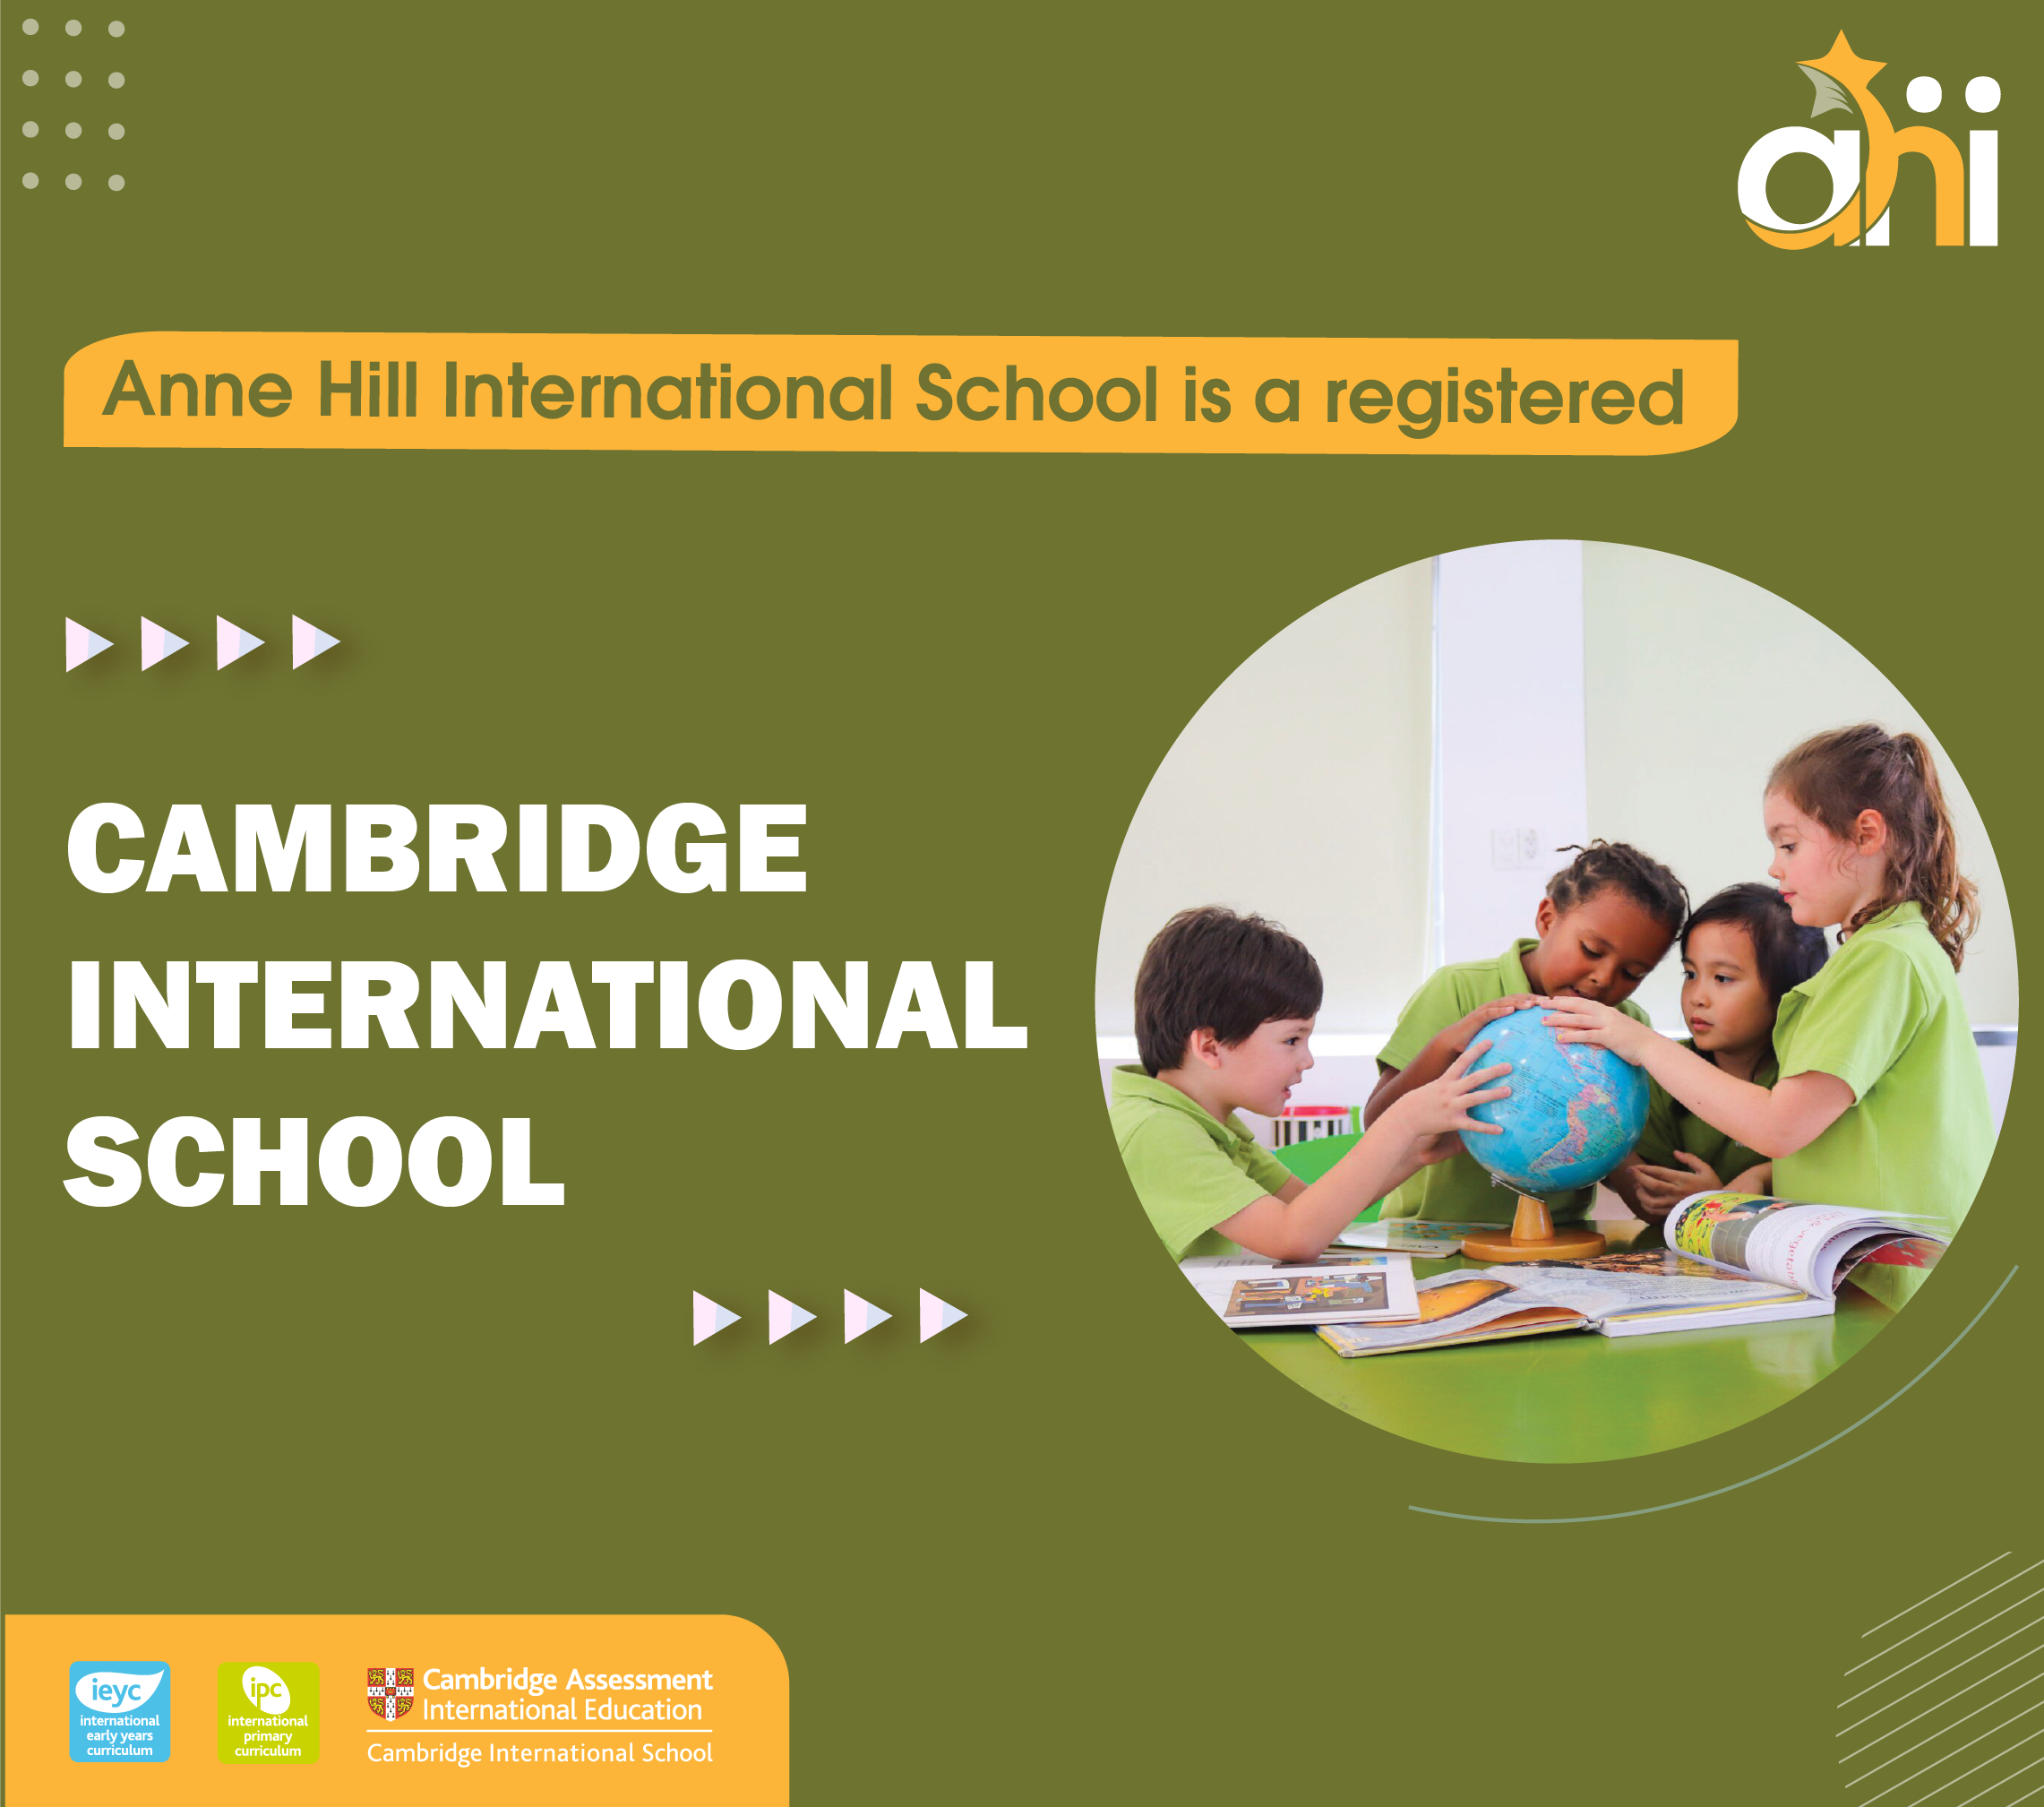 Cambridge Assessment International Education – The persuasiveness and motivation behind one of the UK’s most prestigious educational systems